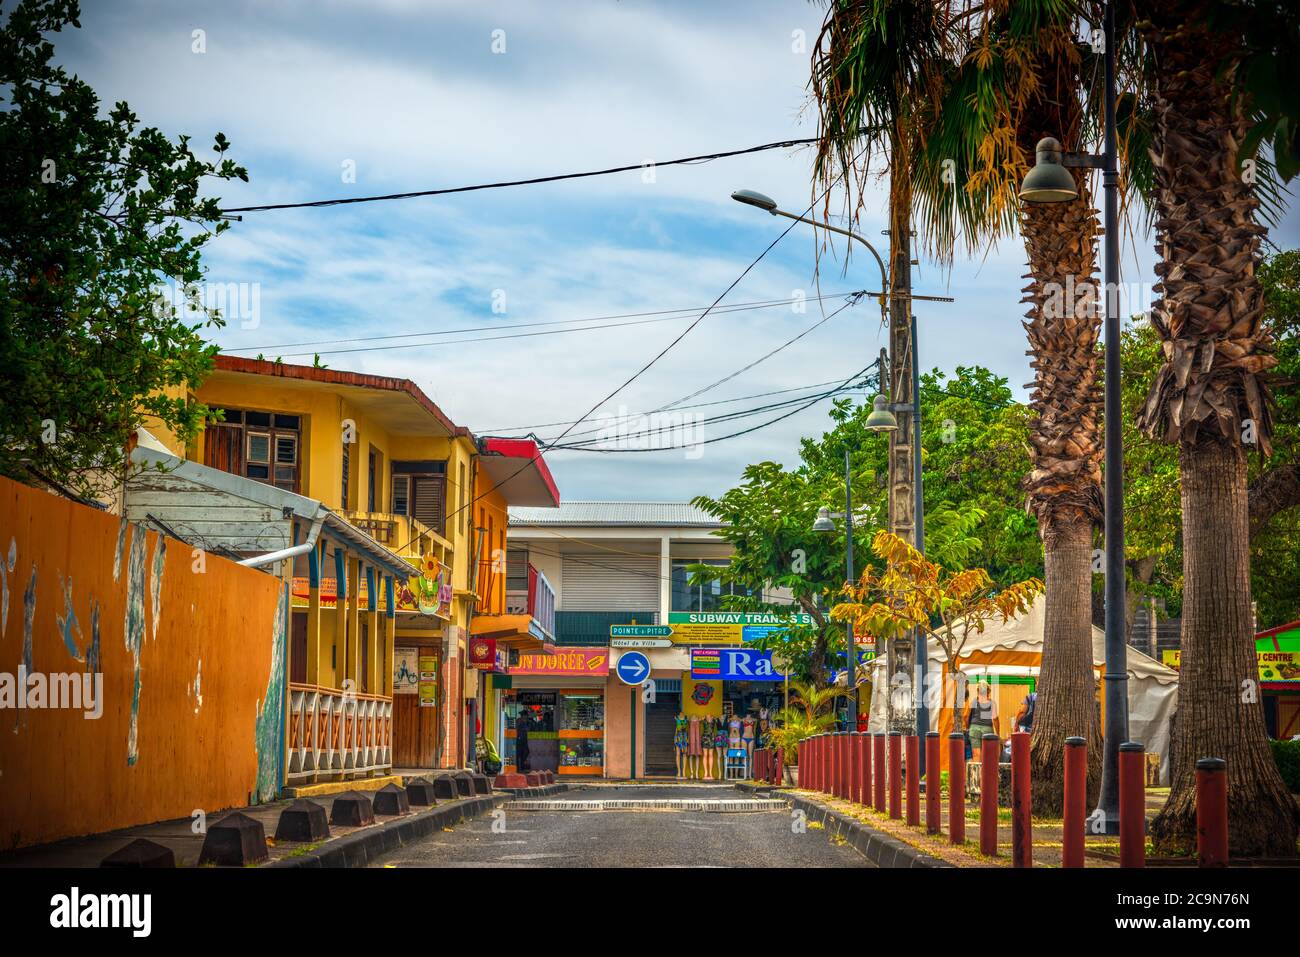 Guadeloupe, FR - February 15, 2019: Picturesque street in a small village in Guadeloupe, French west indies. Lesser Antilles, Caribbean Stock Photo